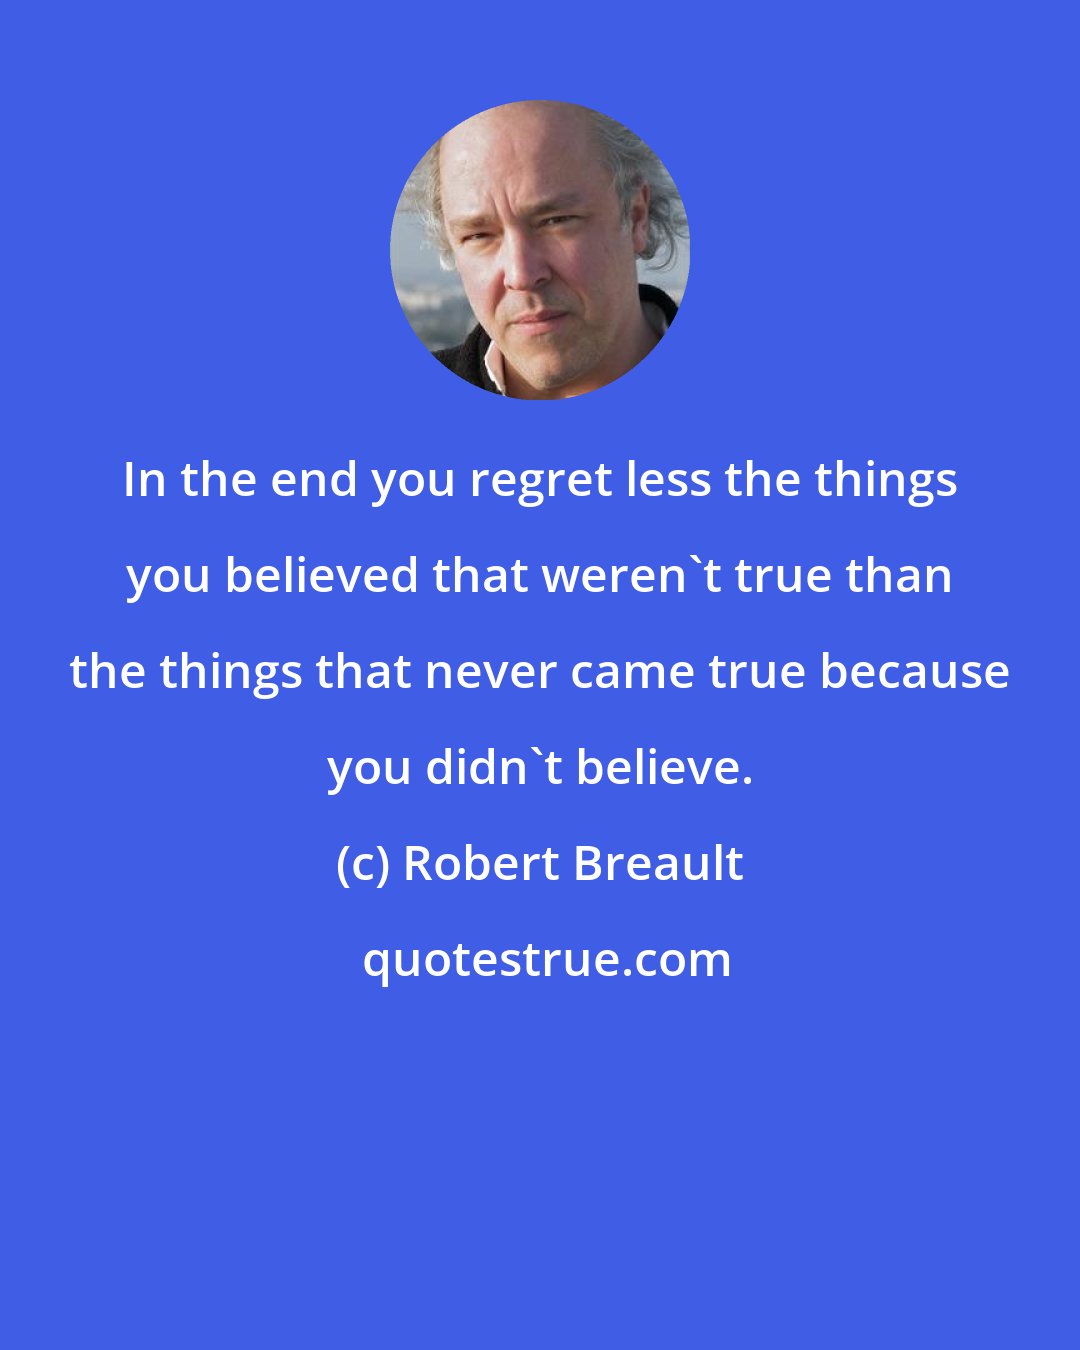 Robert Breault: In the end you regret less the things you believed that weren't true than the things that never came true because you didn't believe.